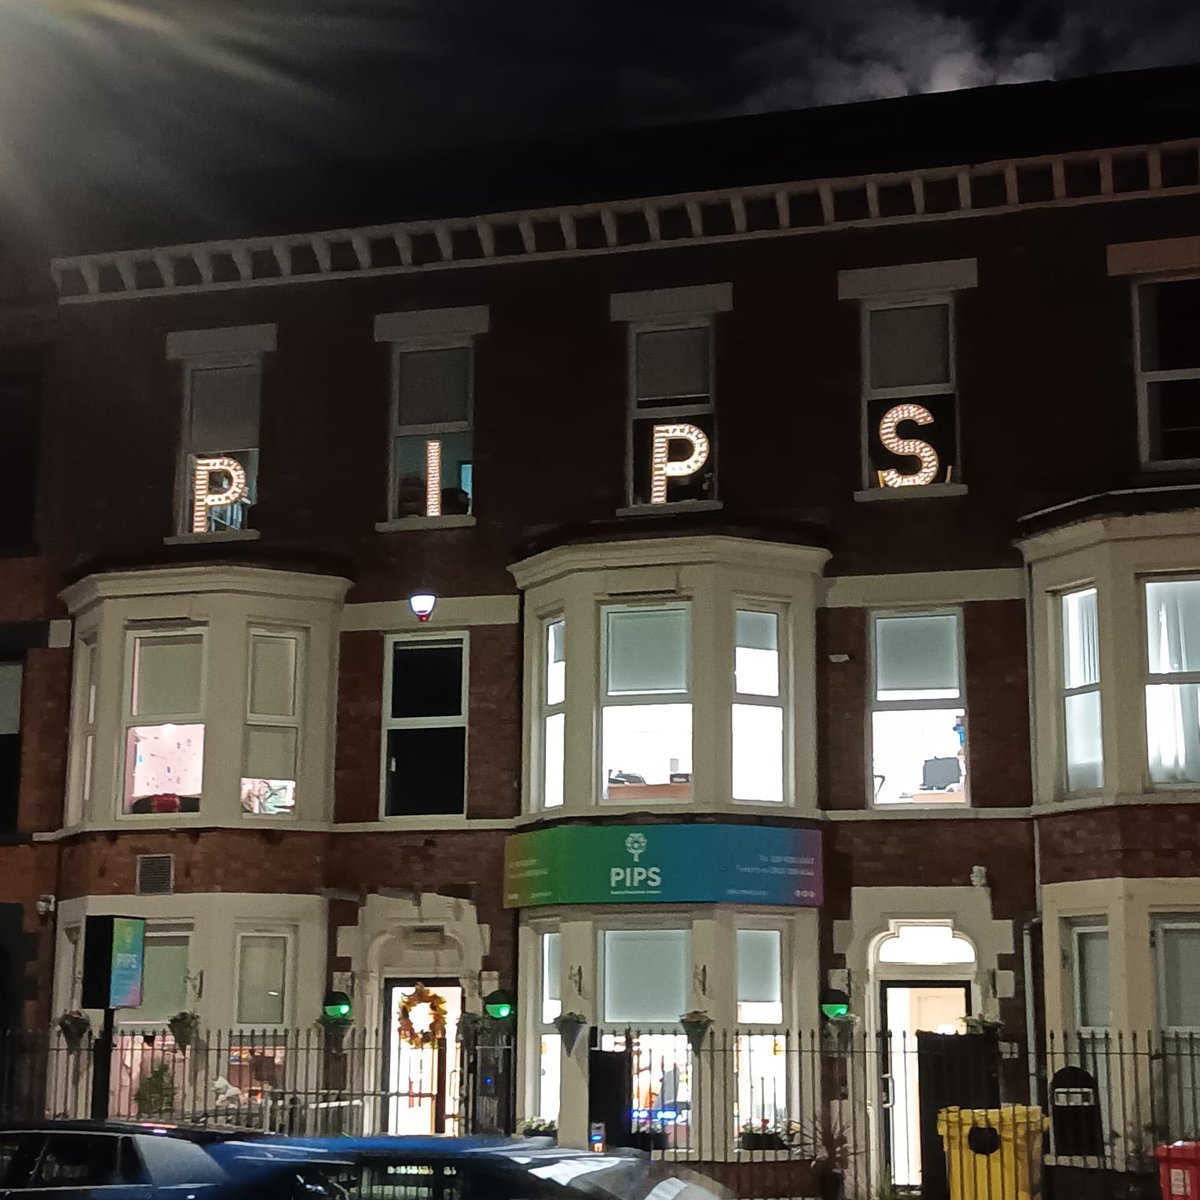 Our Belfast office on Antrim Road has received some new lettering in the hope of reminding passer-by’s that we’re here to support you during these dark winter days and to shine some light and hope into people’s lives!💛

#shinethelight #pips #suicideprevention